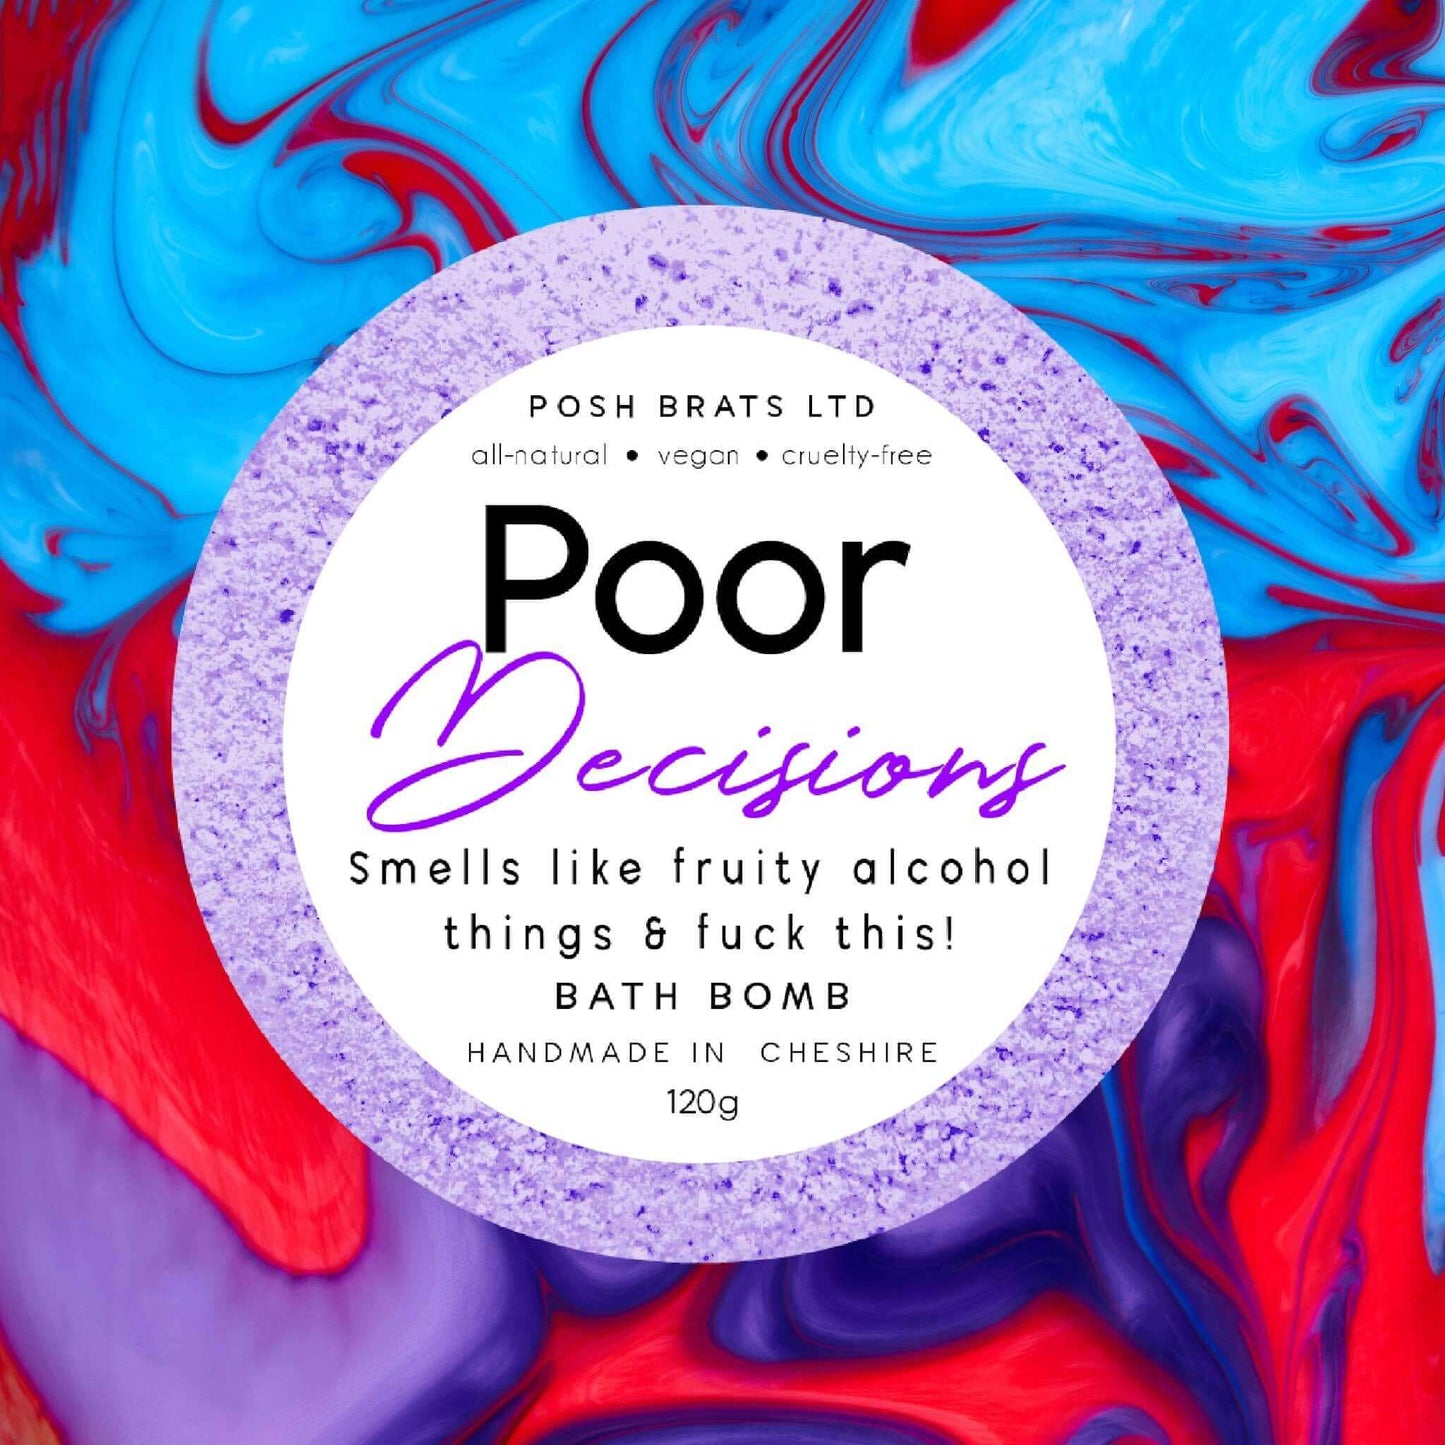 Poor Decisions got you down? Refresh with our Fizzy Bath Bomb! Let the bubbles wash away your worries.